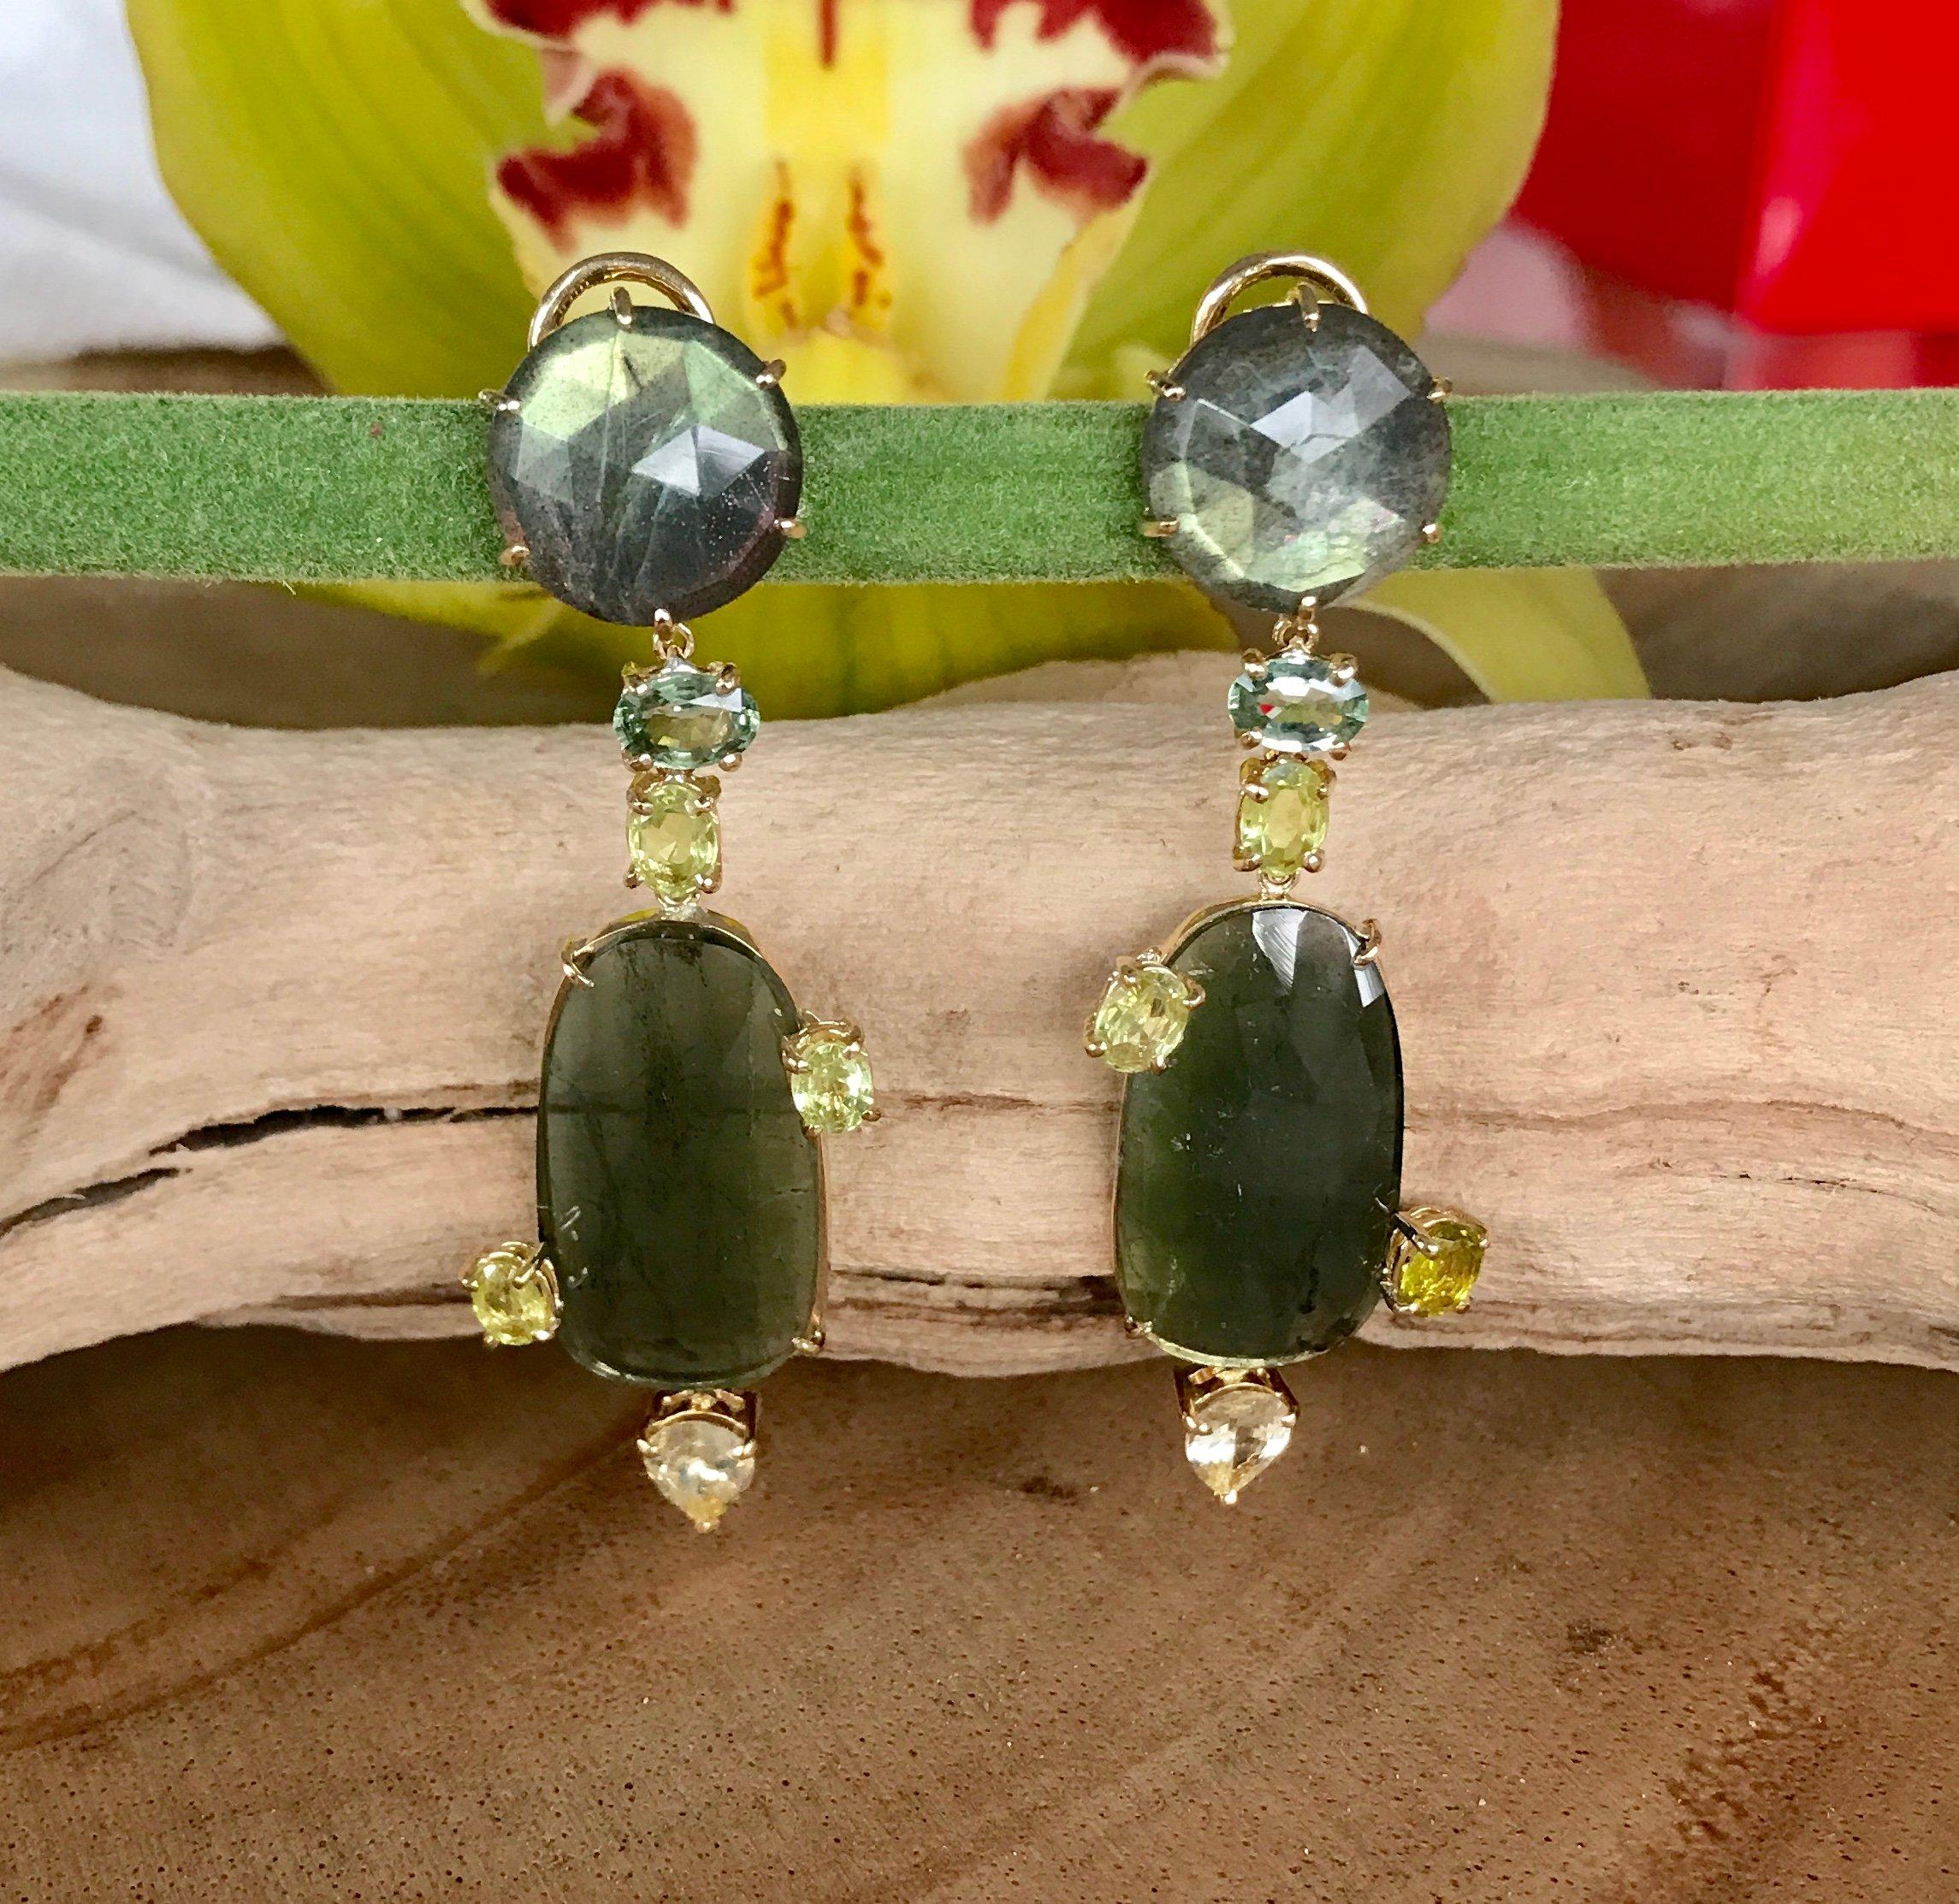 Joon Han whimsical and fun one-of-a-kind earrings of labradorites and fancy rose cut green tourmalines, with faceted sapphire and chrysoberyl accents. These shimmery green drop dangle earrings are handcrafted in 18K yellow gold.

Joon Han is a